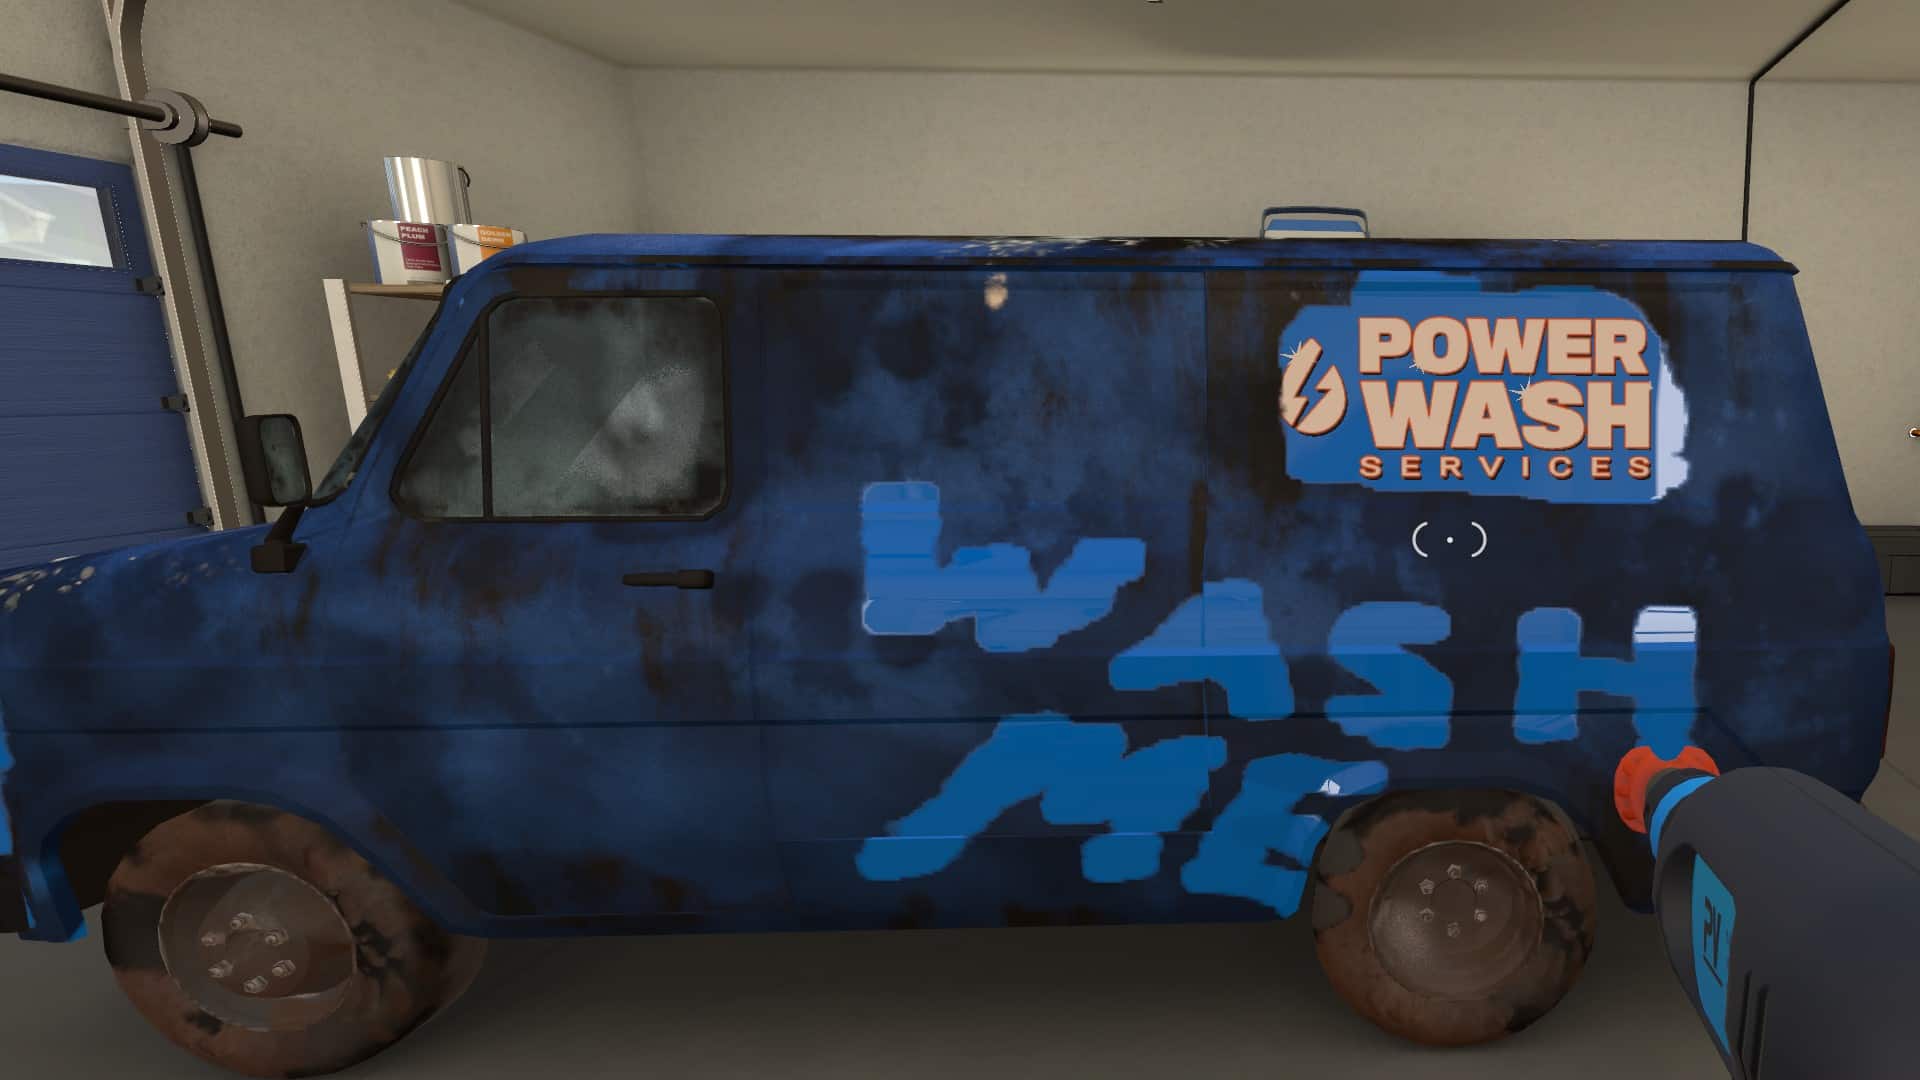 Wash a virtual car and more in PowerWash Simulator on Steam